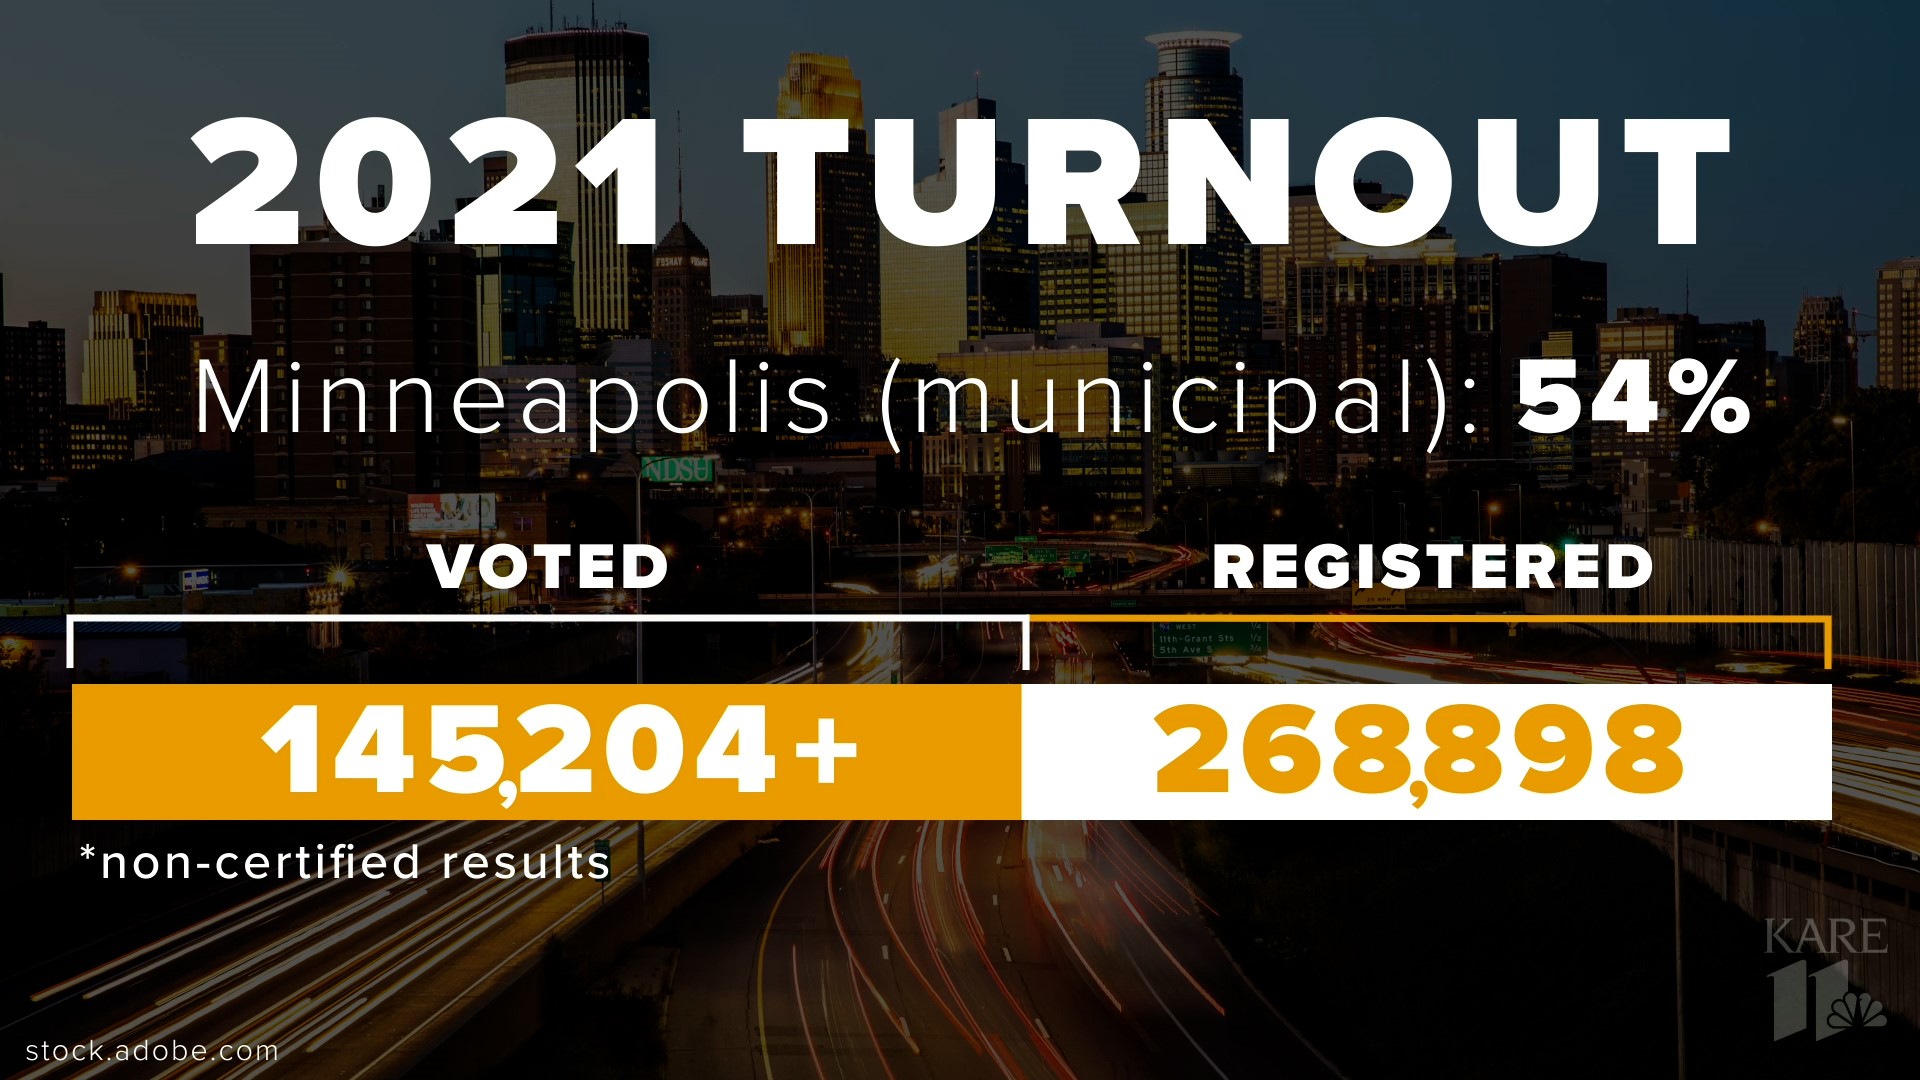 Voter turnout in Minneapolis' 2021 municipal election was the highest it has been in roughly three decades.